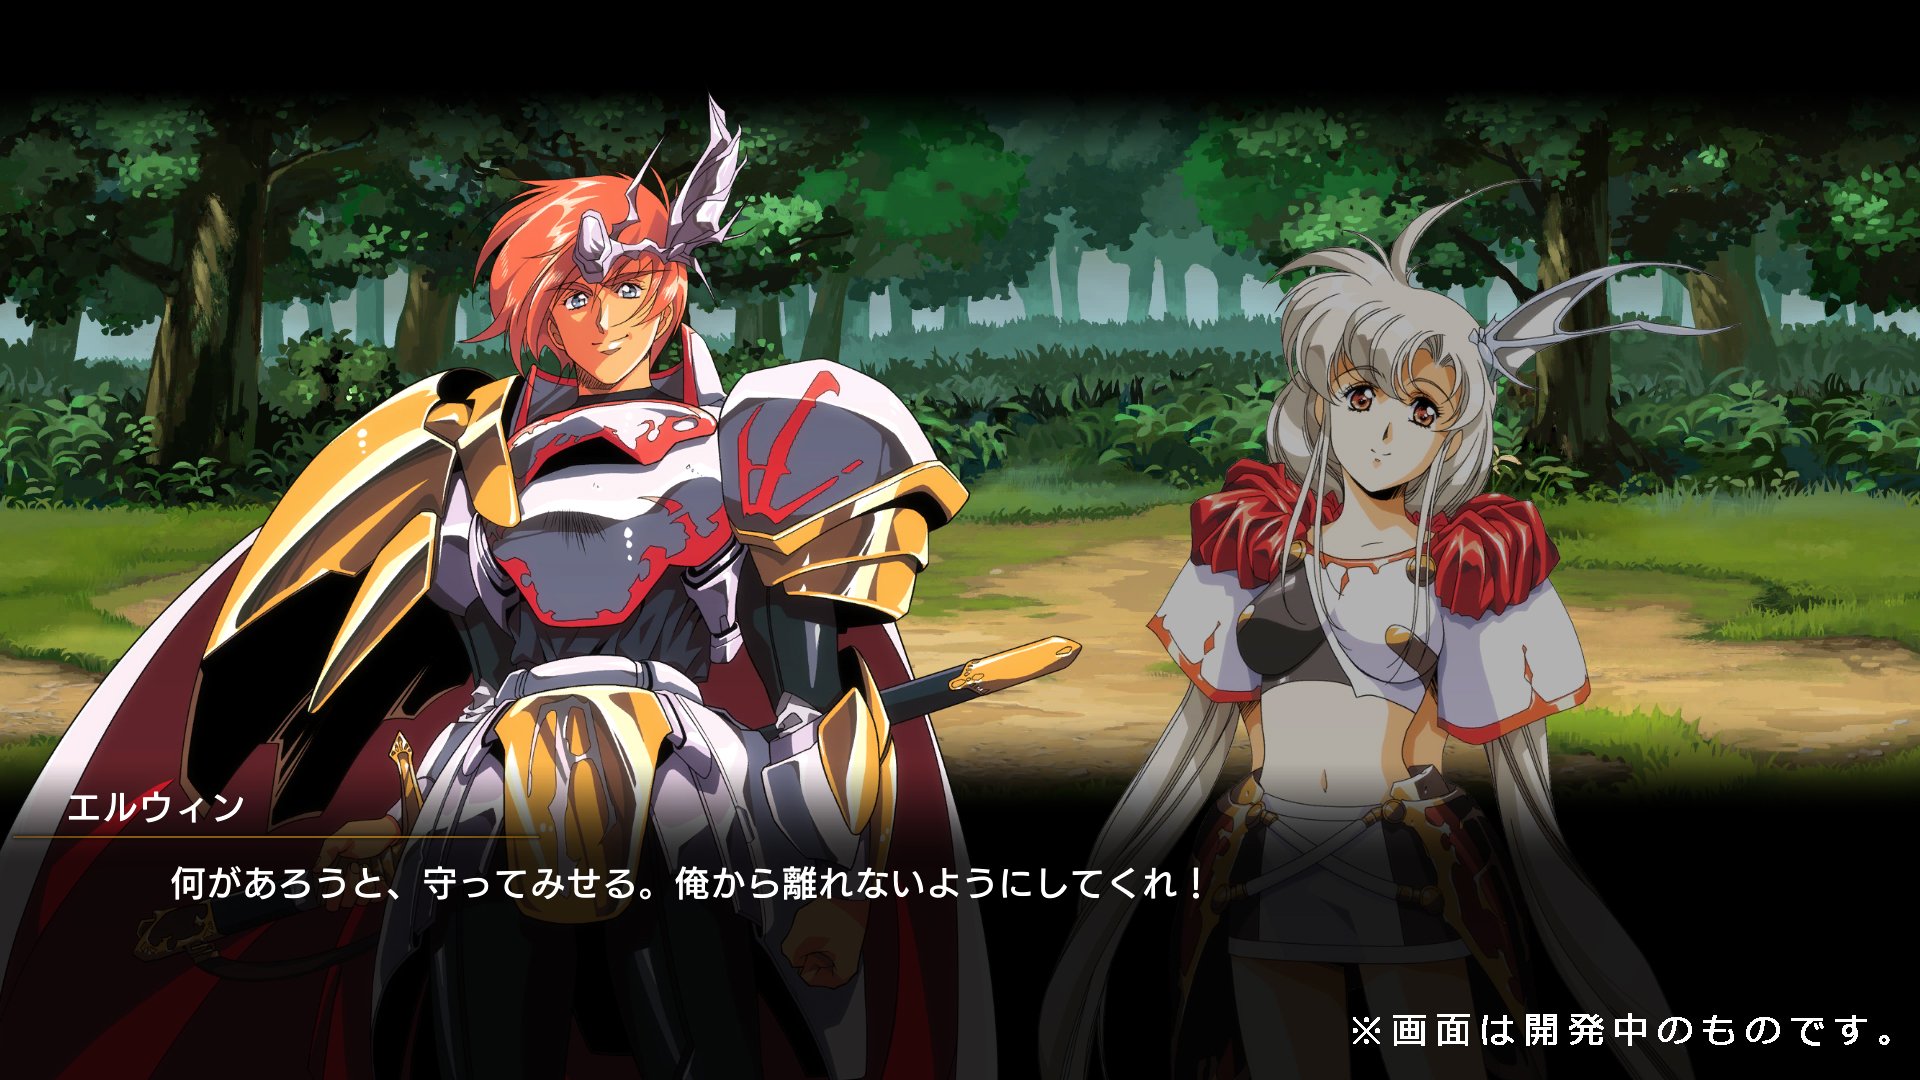 Langrisser i ii dated for japan limited edition details cover art screens new features and more the archives